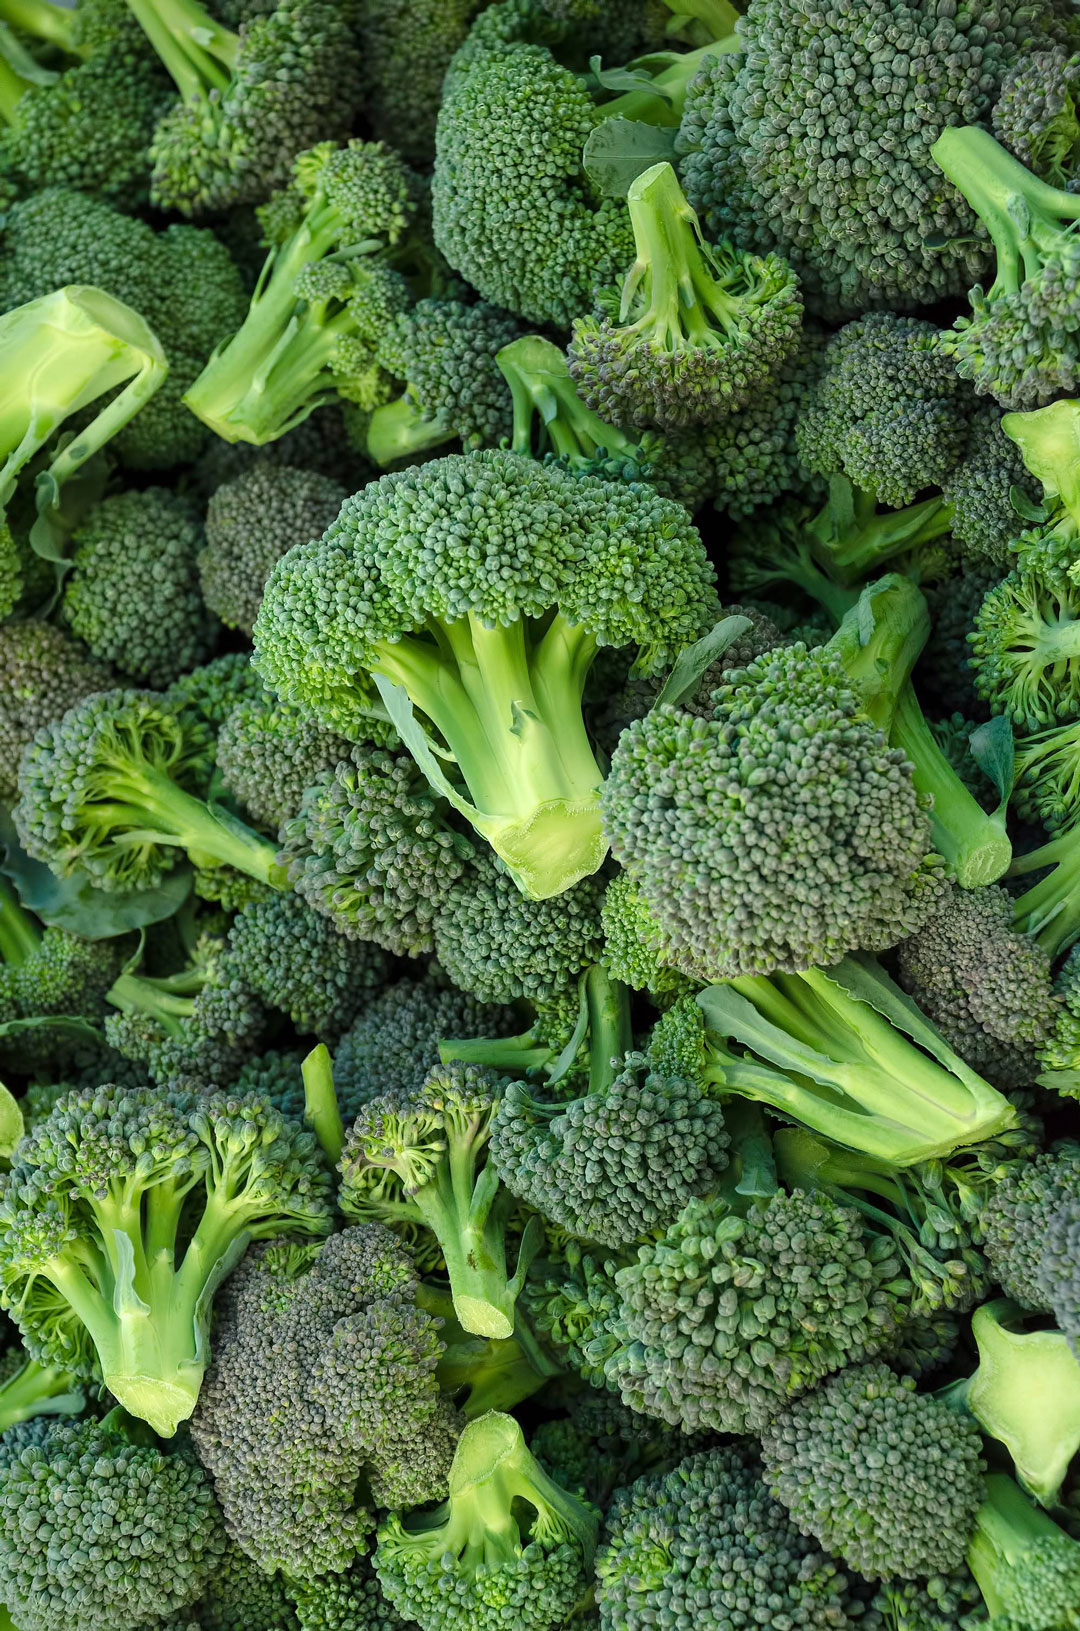 A close-up view of numerous fresh broccoli florets. The broccoli is vibrantly green, with tightly packed buds and stalks. The image showcases the texture and freshness of the vegetables.